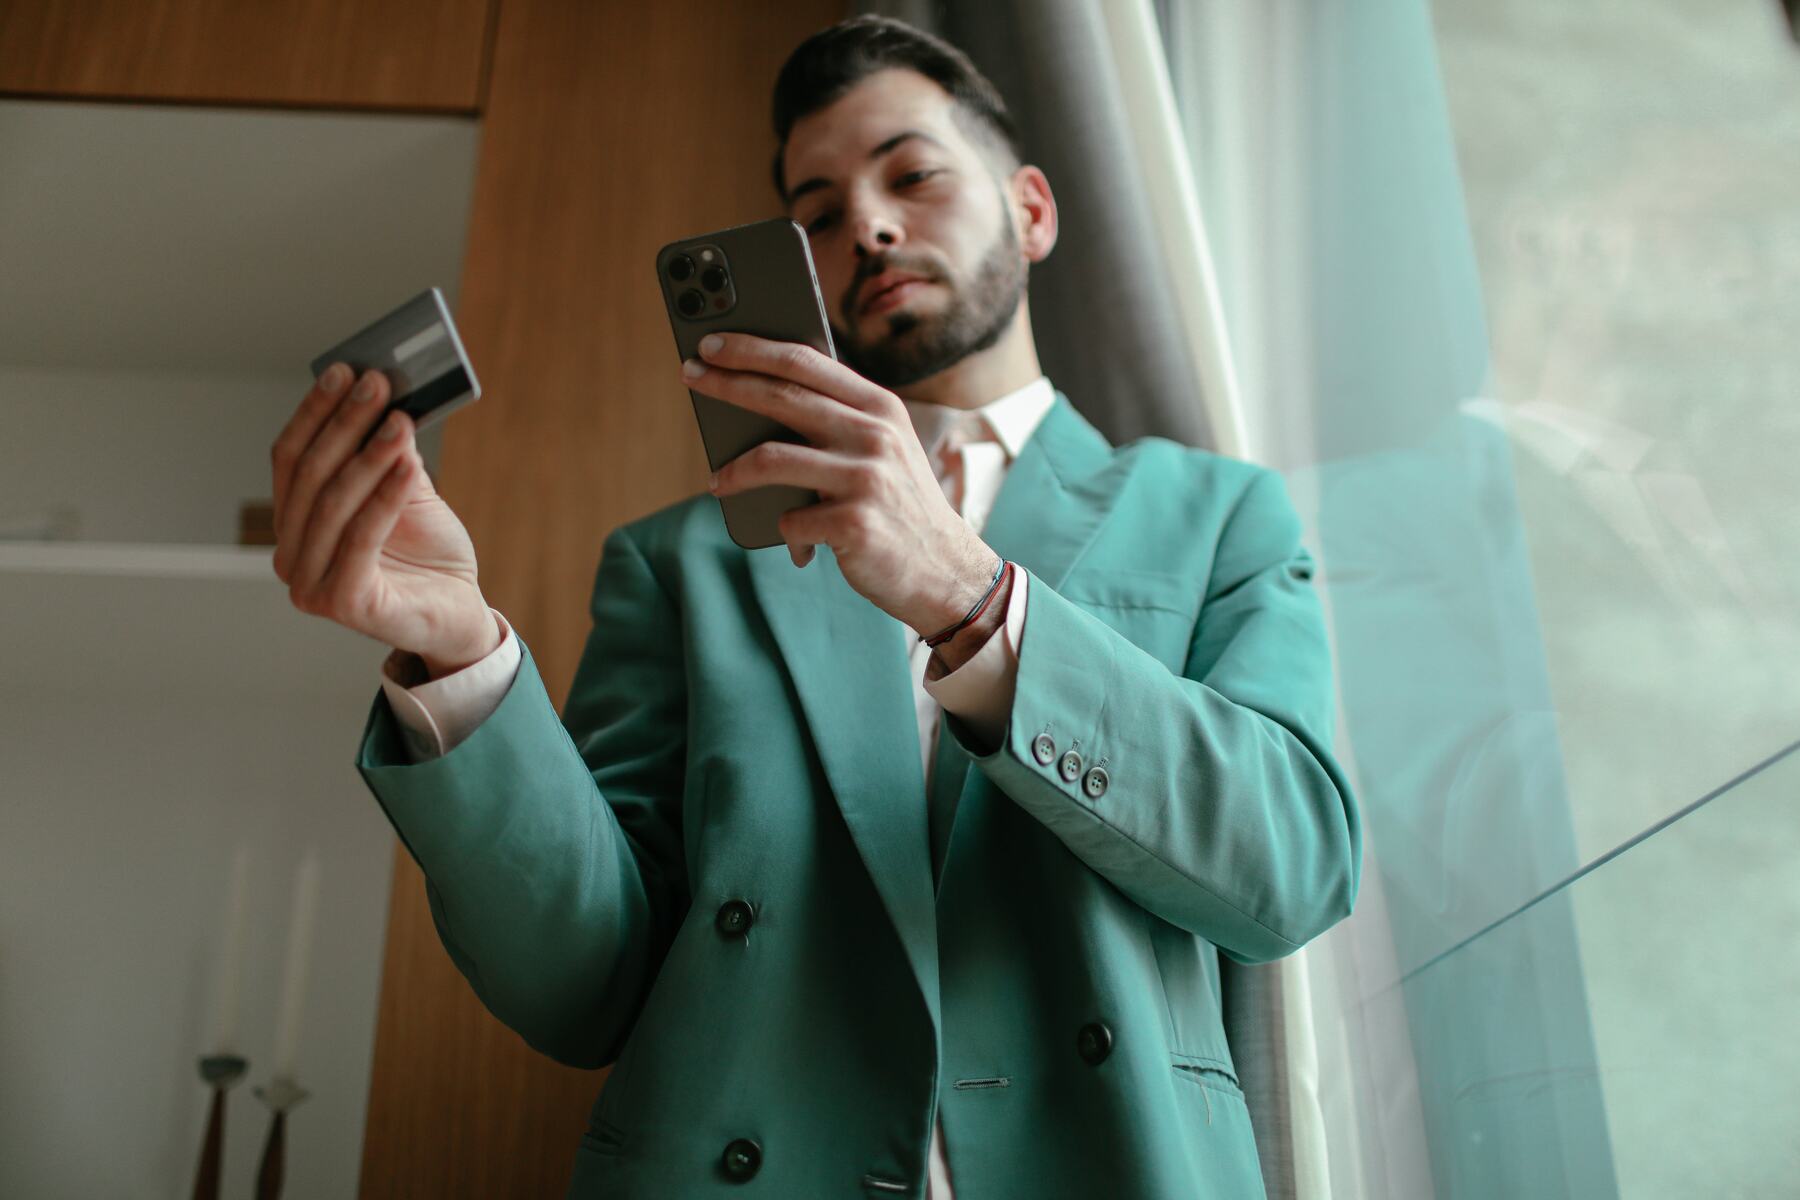 A man wearing formal green suit holding his mobile phone and credit card